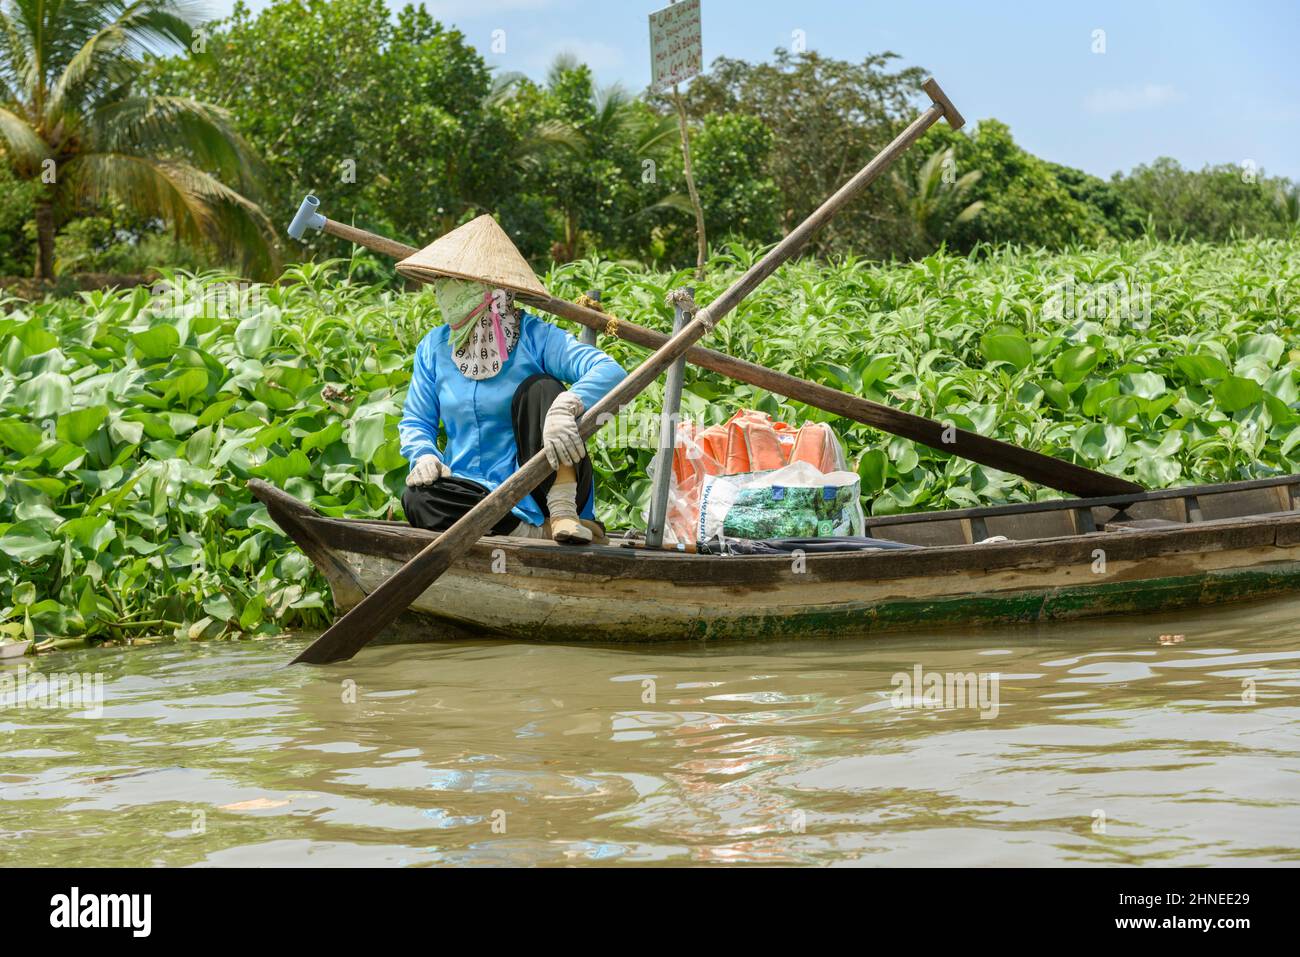 Vietnamese woman with a traditional wooden rowing boat (sampan) on the Mekong River, Mekong Delta, Vinh Long Province, southern Vietnam Stock Photo